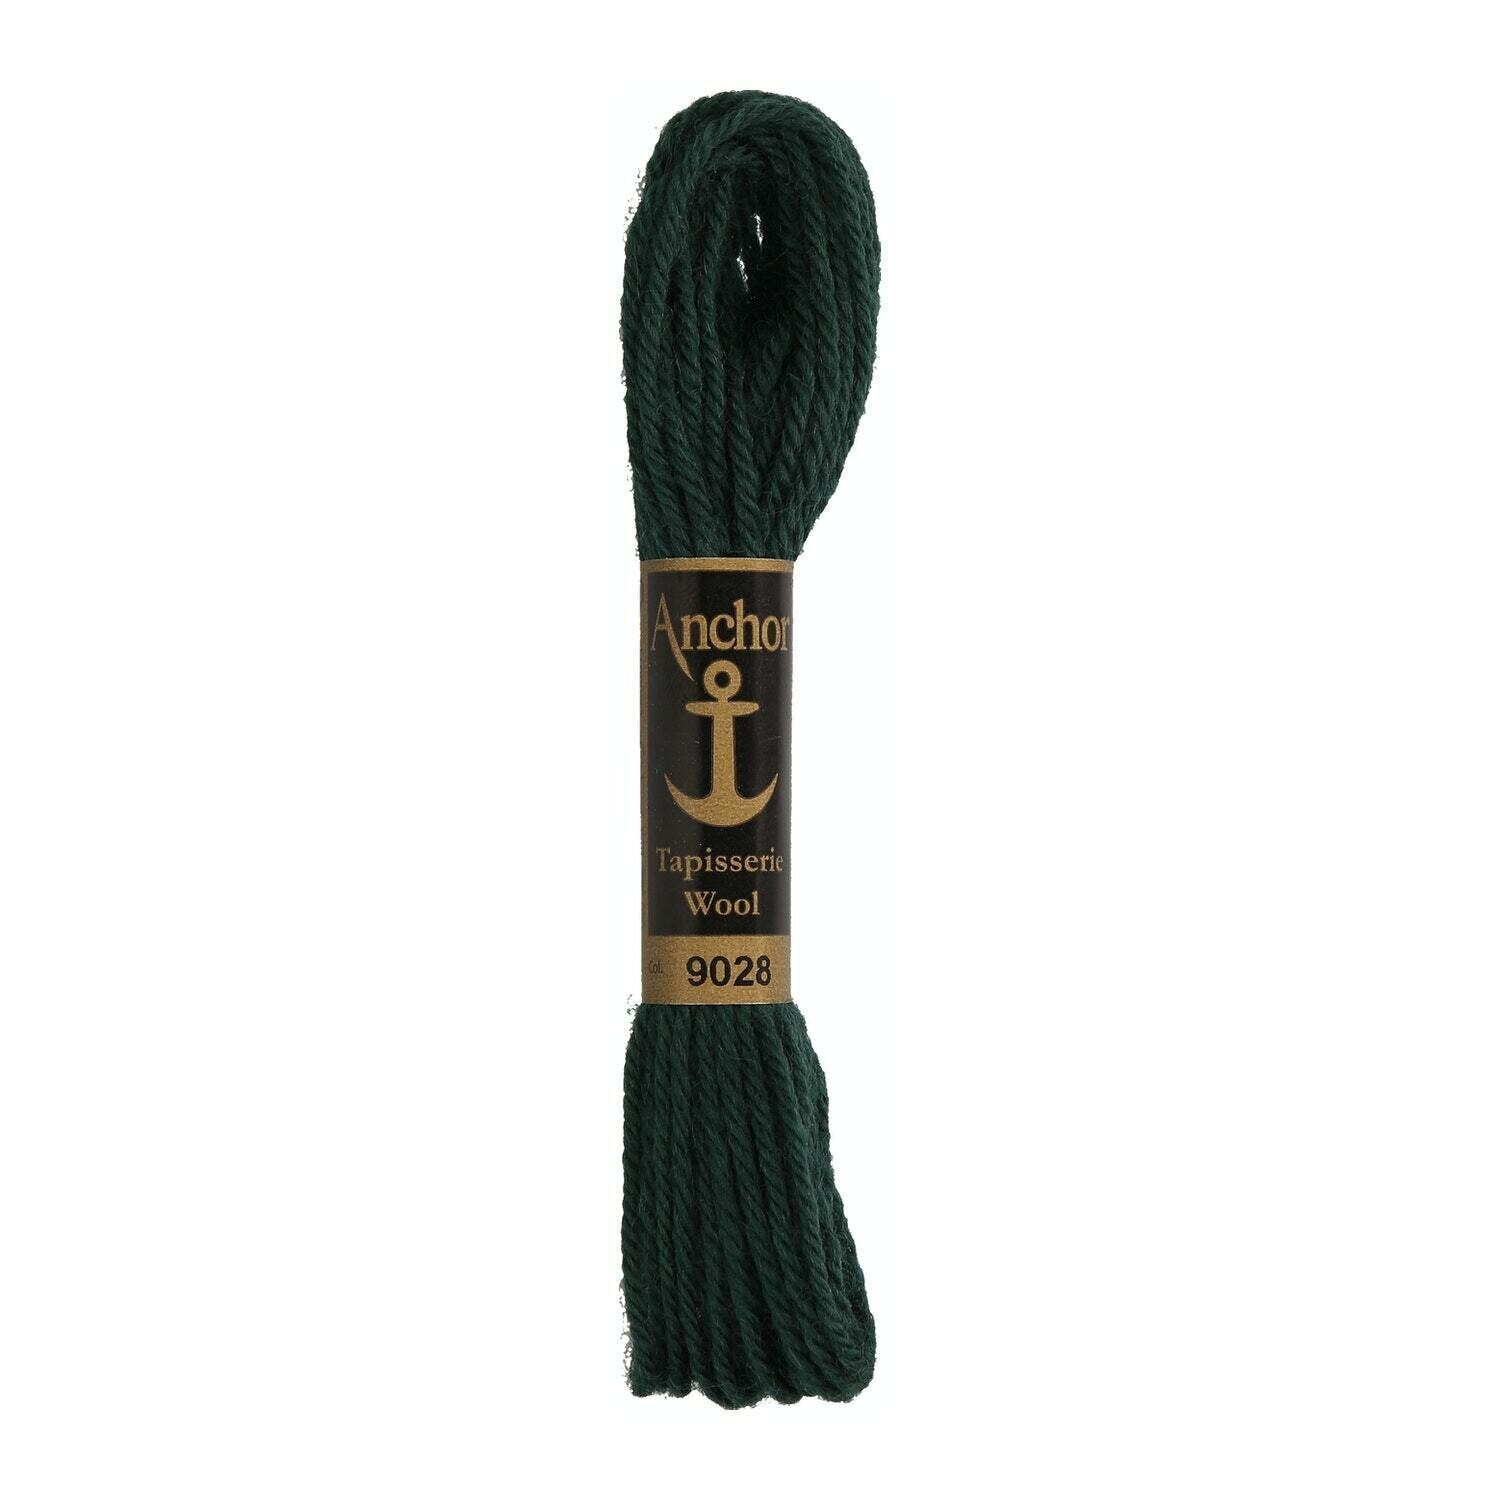 Anchor Tapisserie Wool #09028